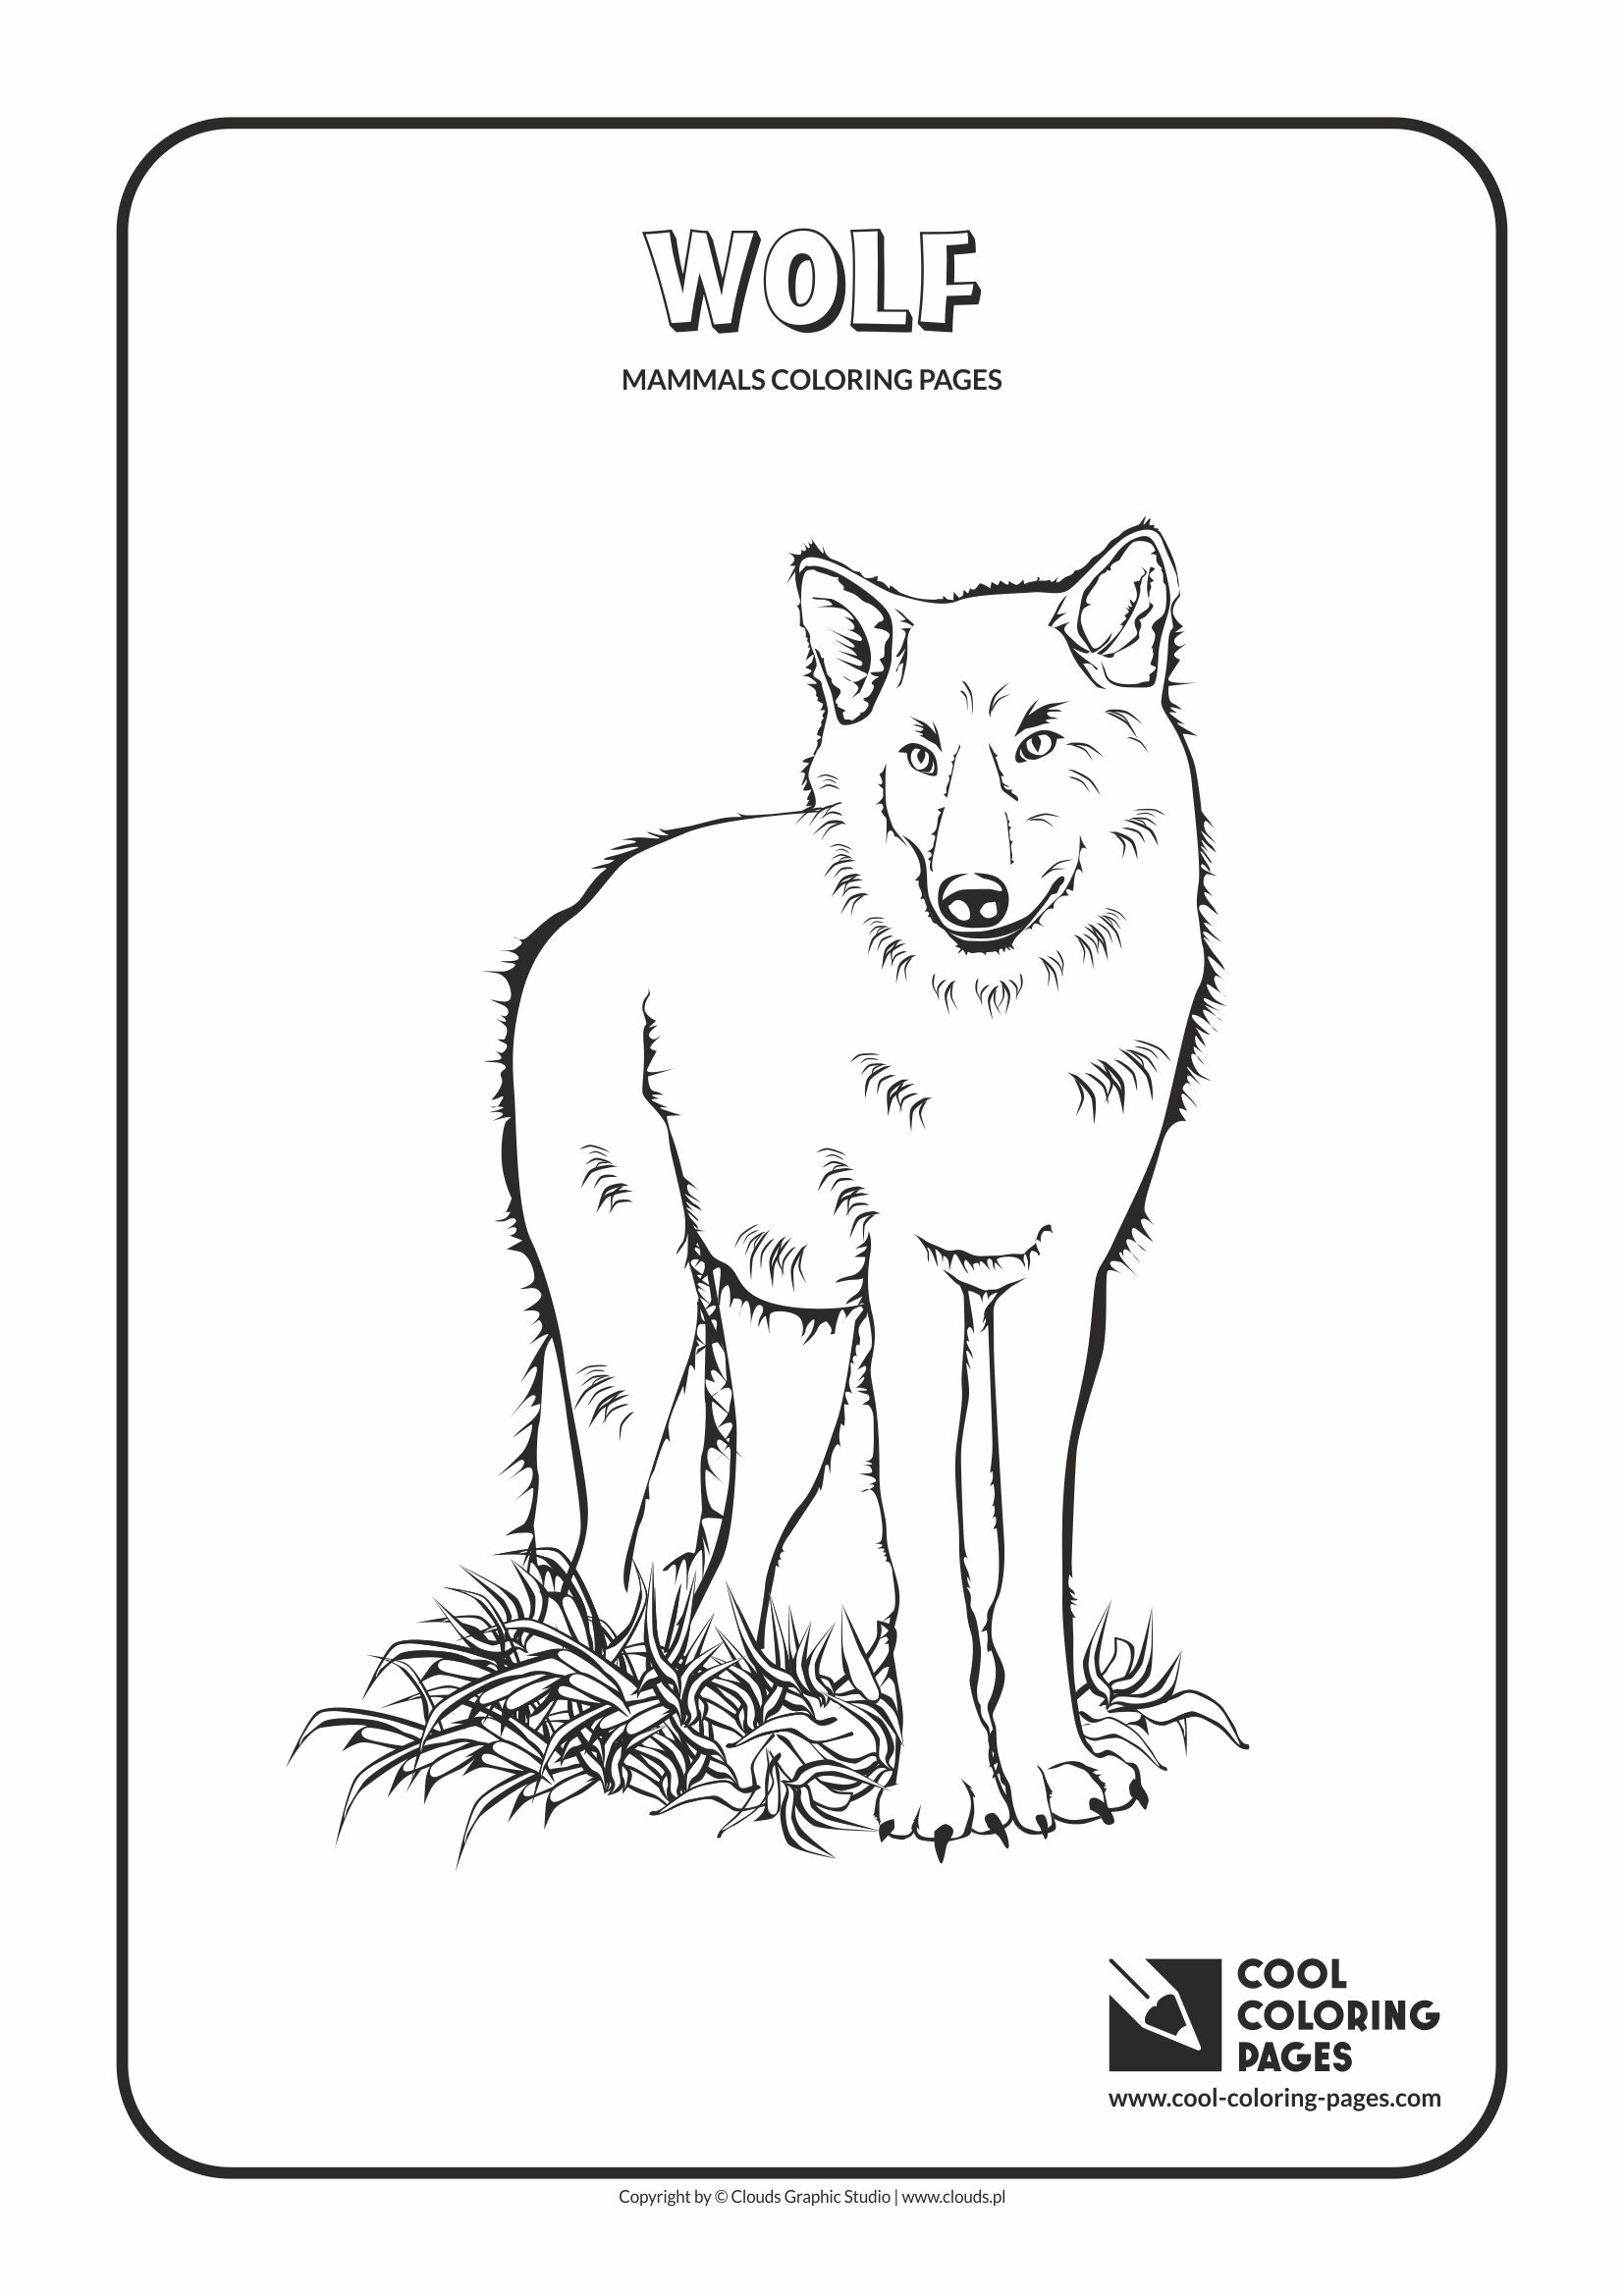 Cool Coloring Pages - Animals / Wolf / Coloring page with wolf